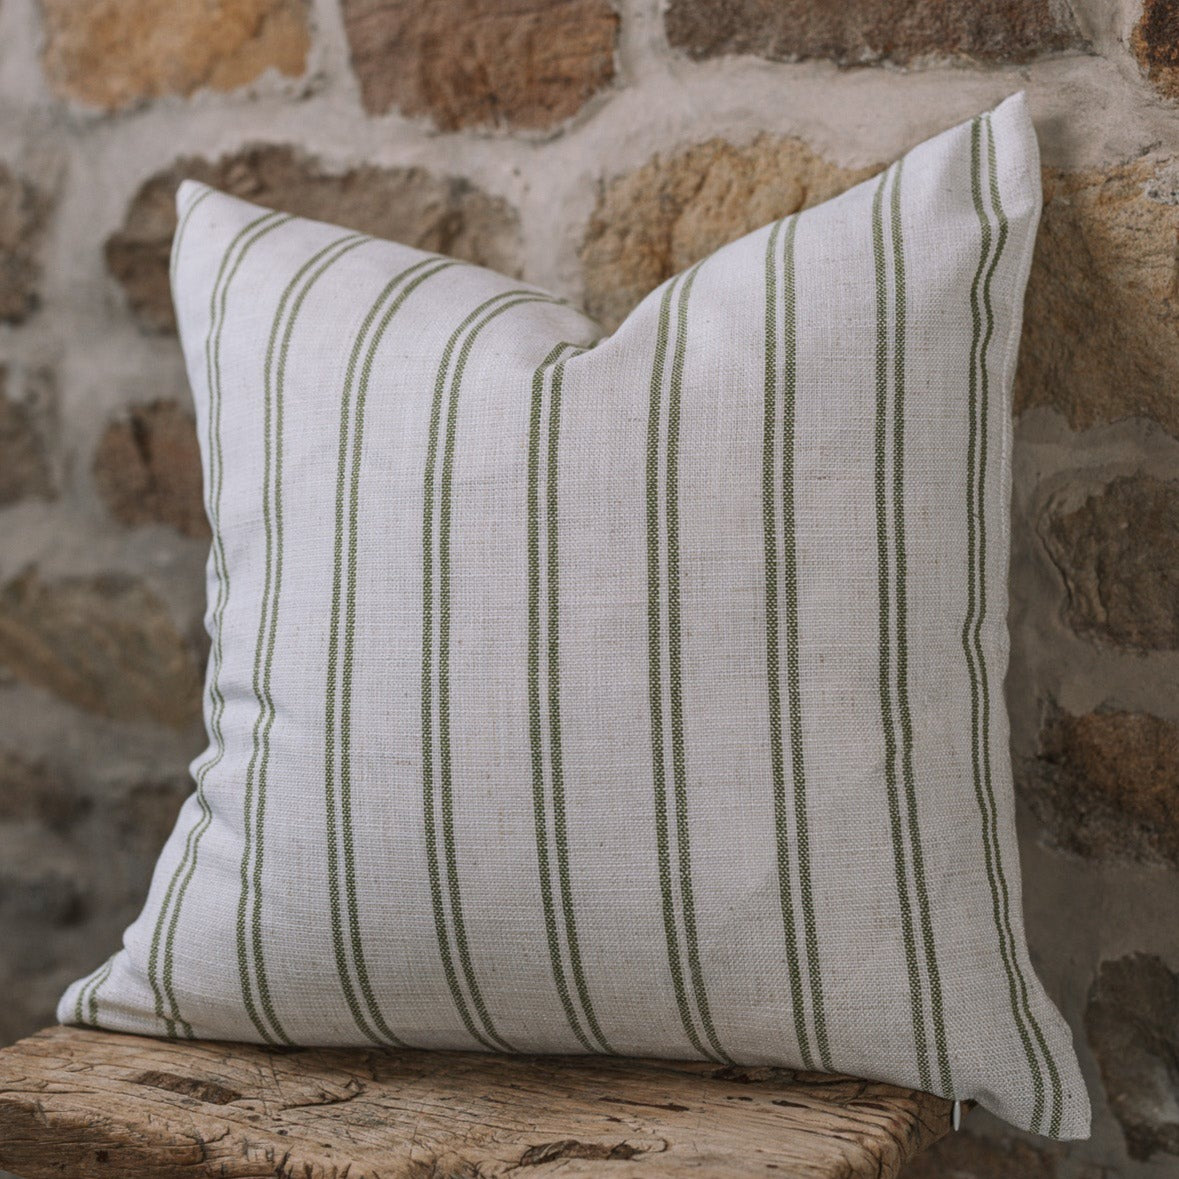 Olive and off white striped cushion on wooden stool.